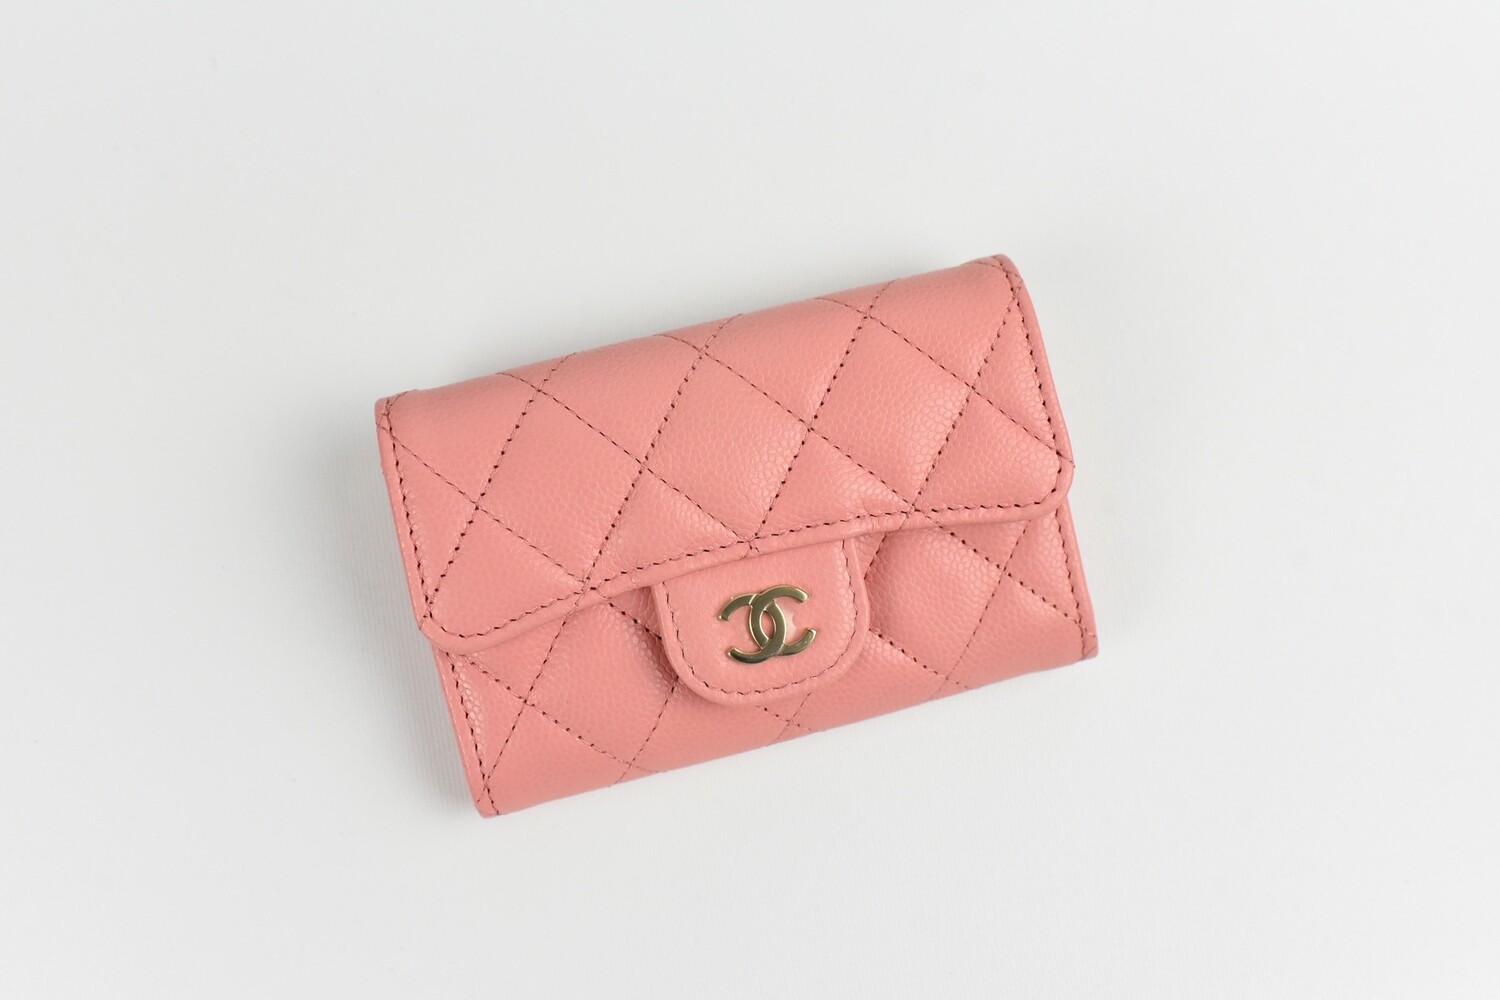 Chanel SLG Snap Cardholder, Pink Caviar with Gold Hardware, New in Box  GA003 - Julia Rose Boston